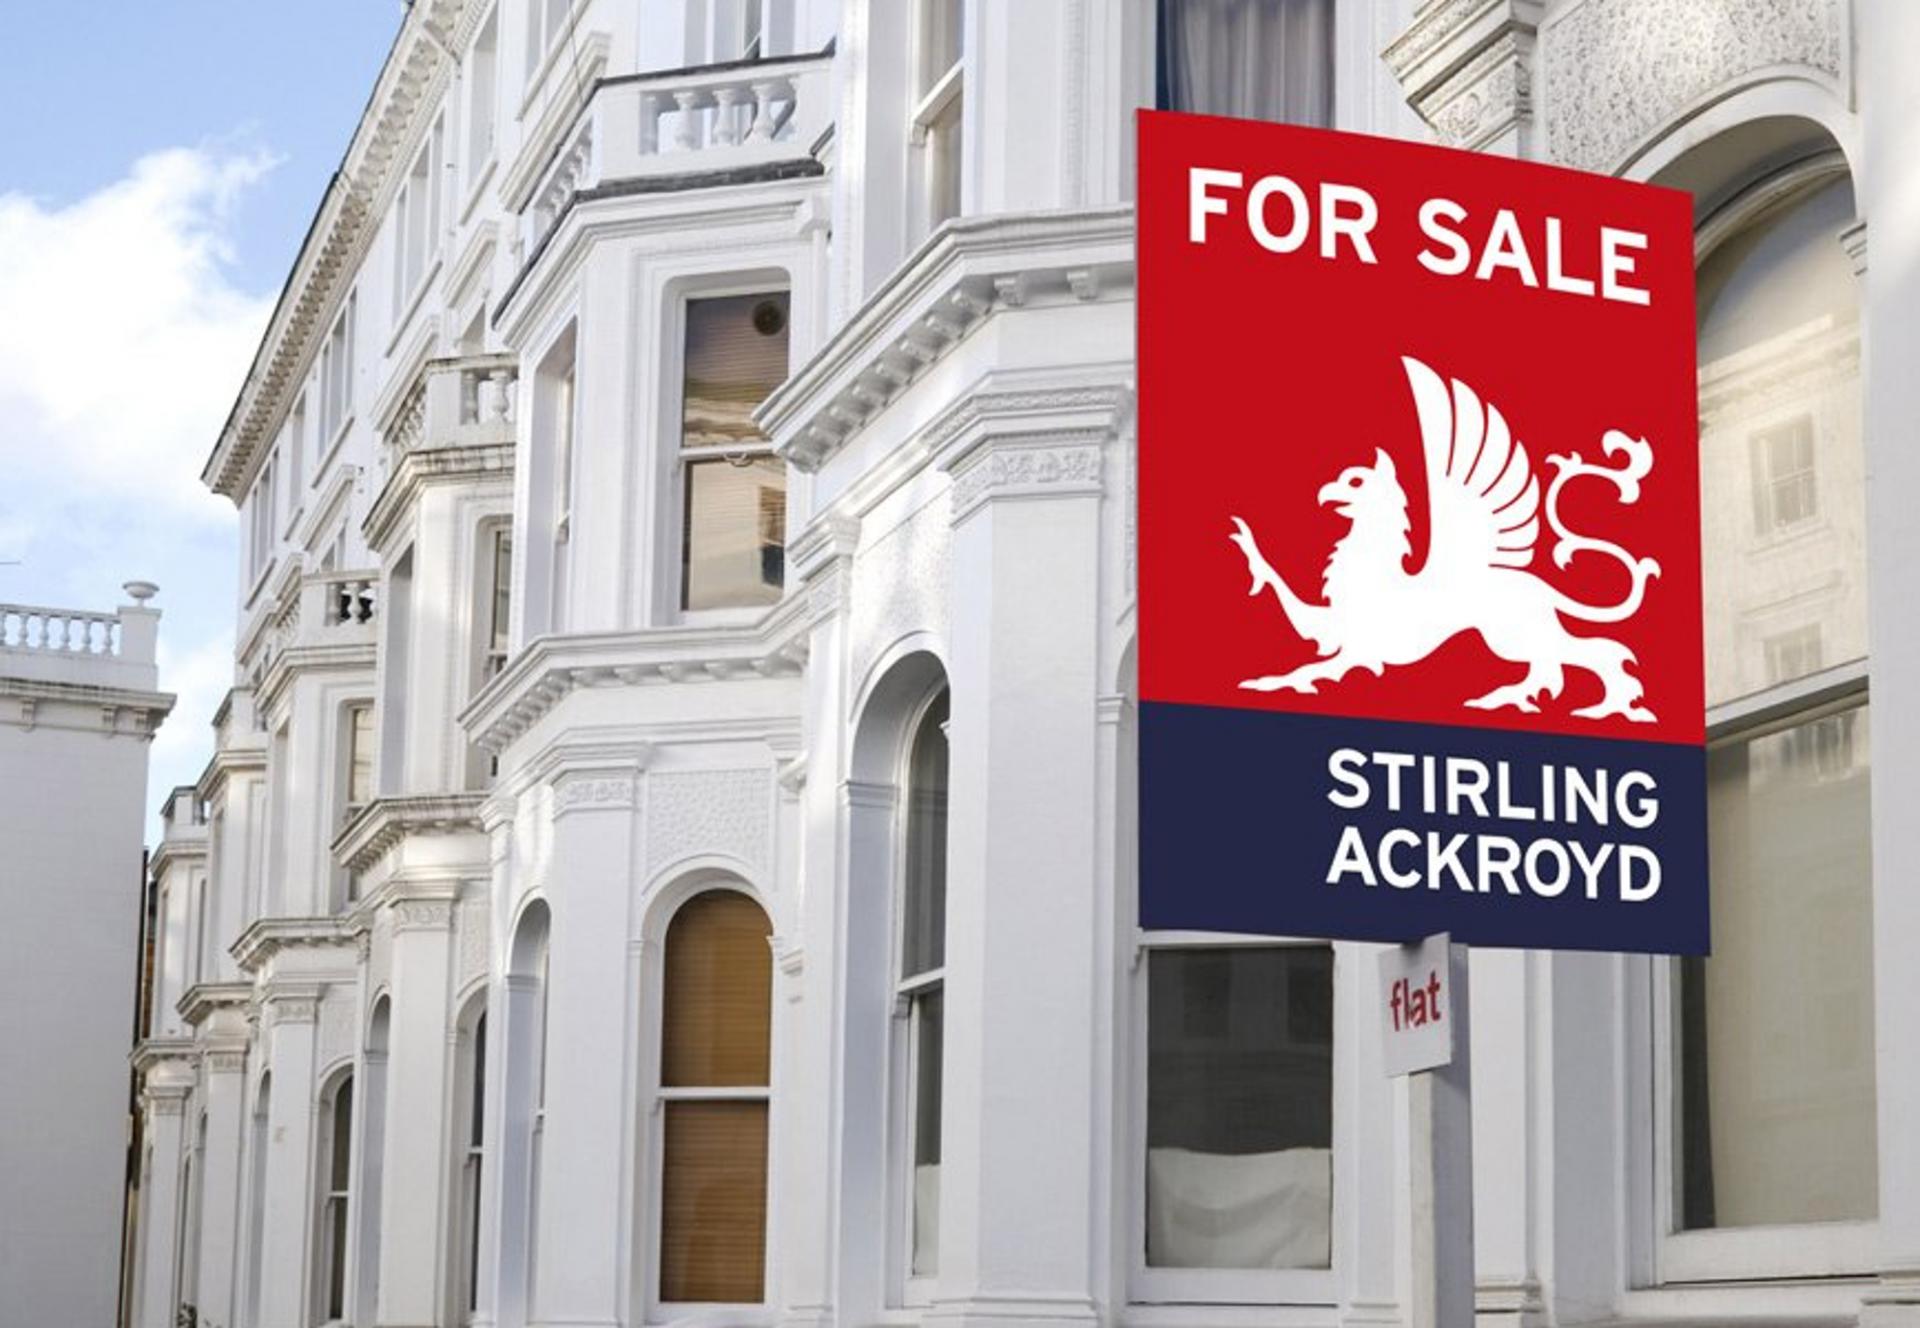 Lettings agency plans further acquisitions after revenue grows 20 per cent